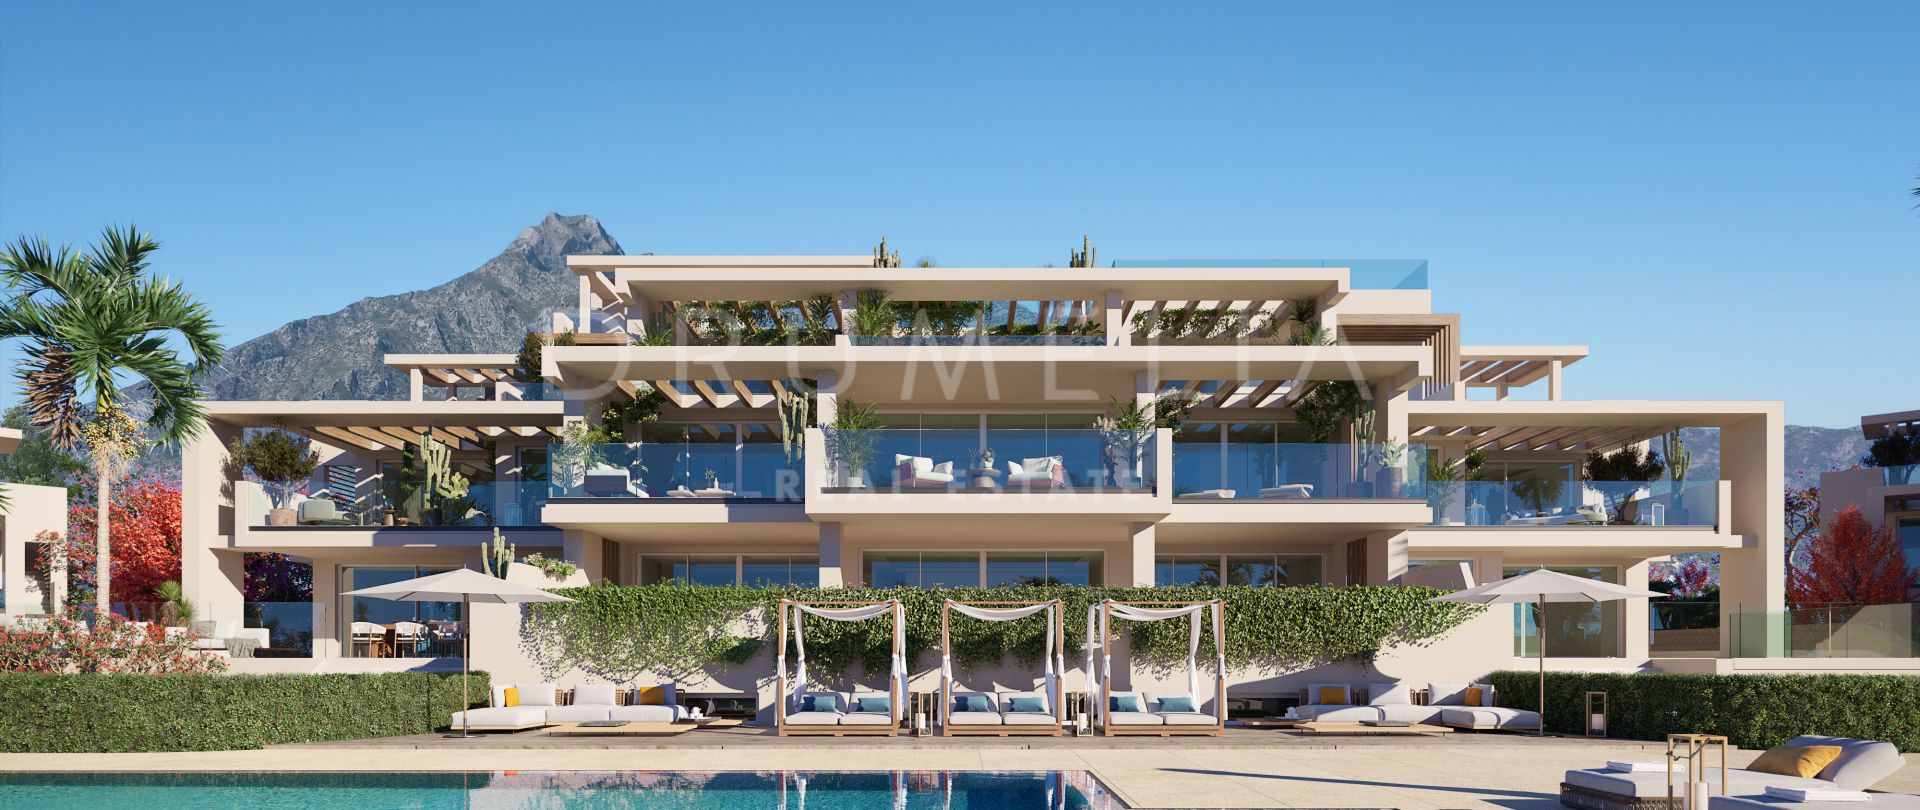 New luxury modern duplex penthouse with private pool and stunning views, Marbella’s Golden Mile